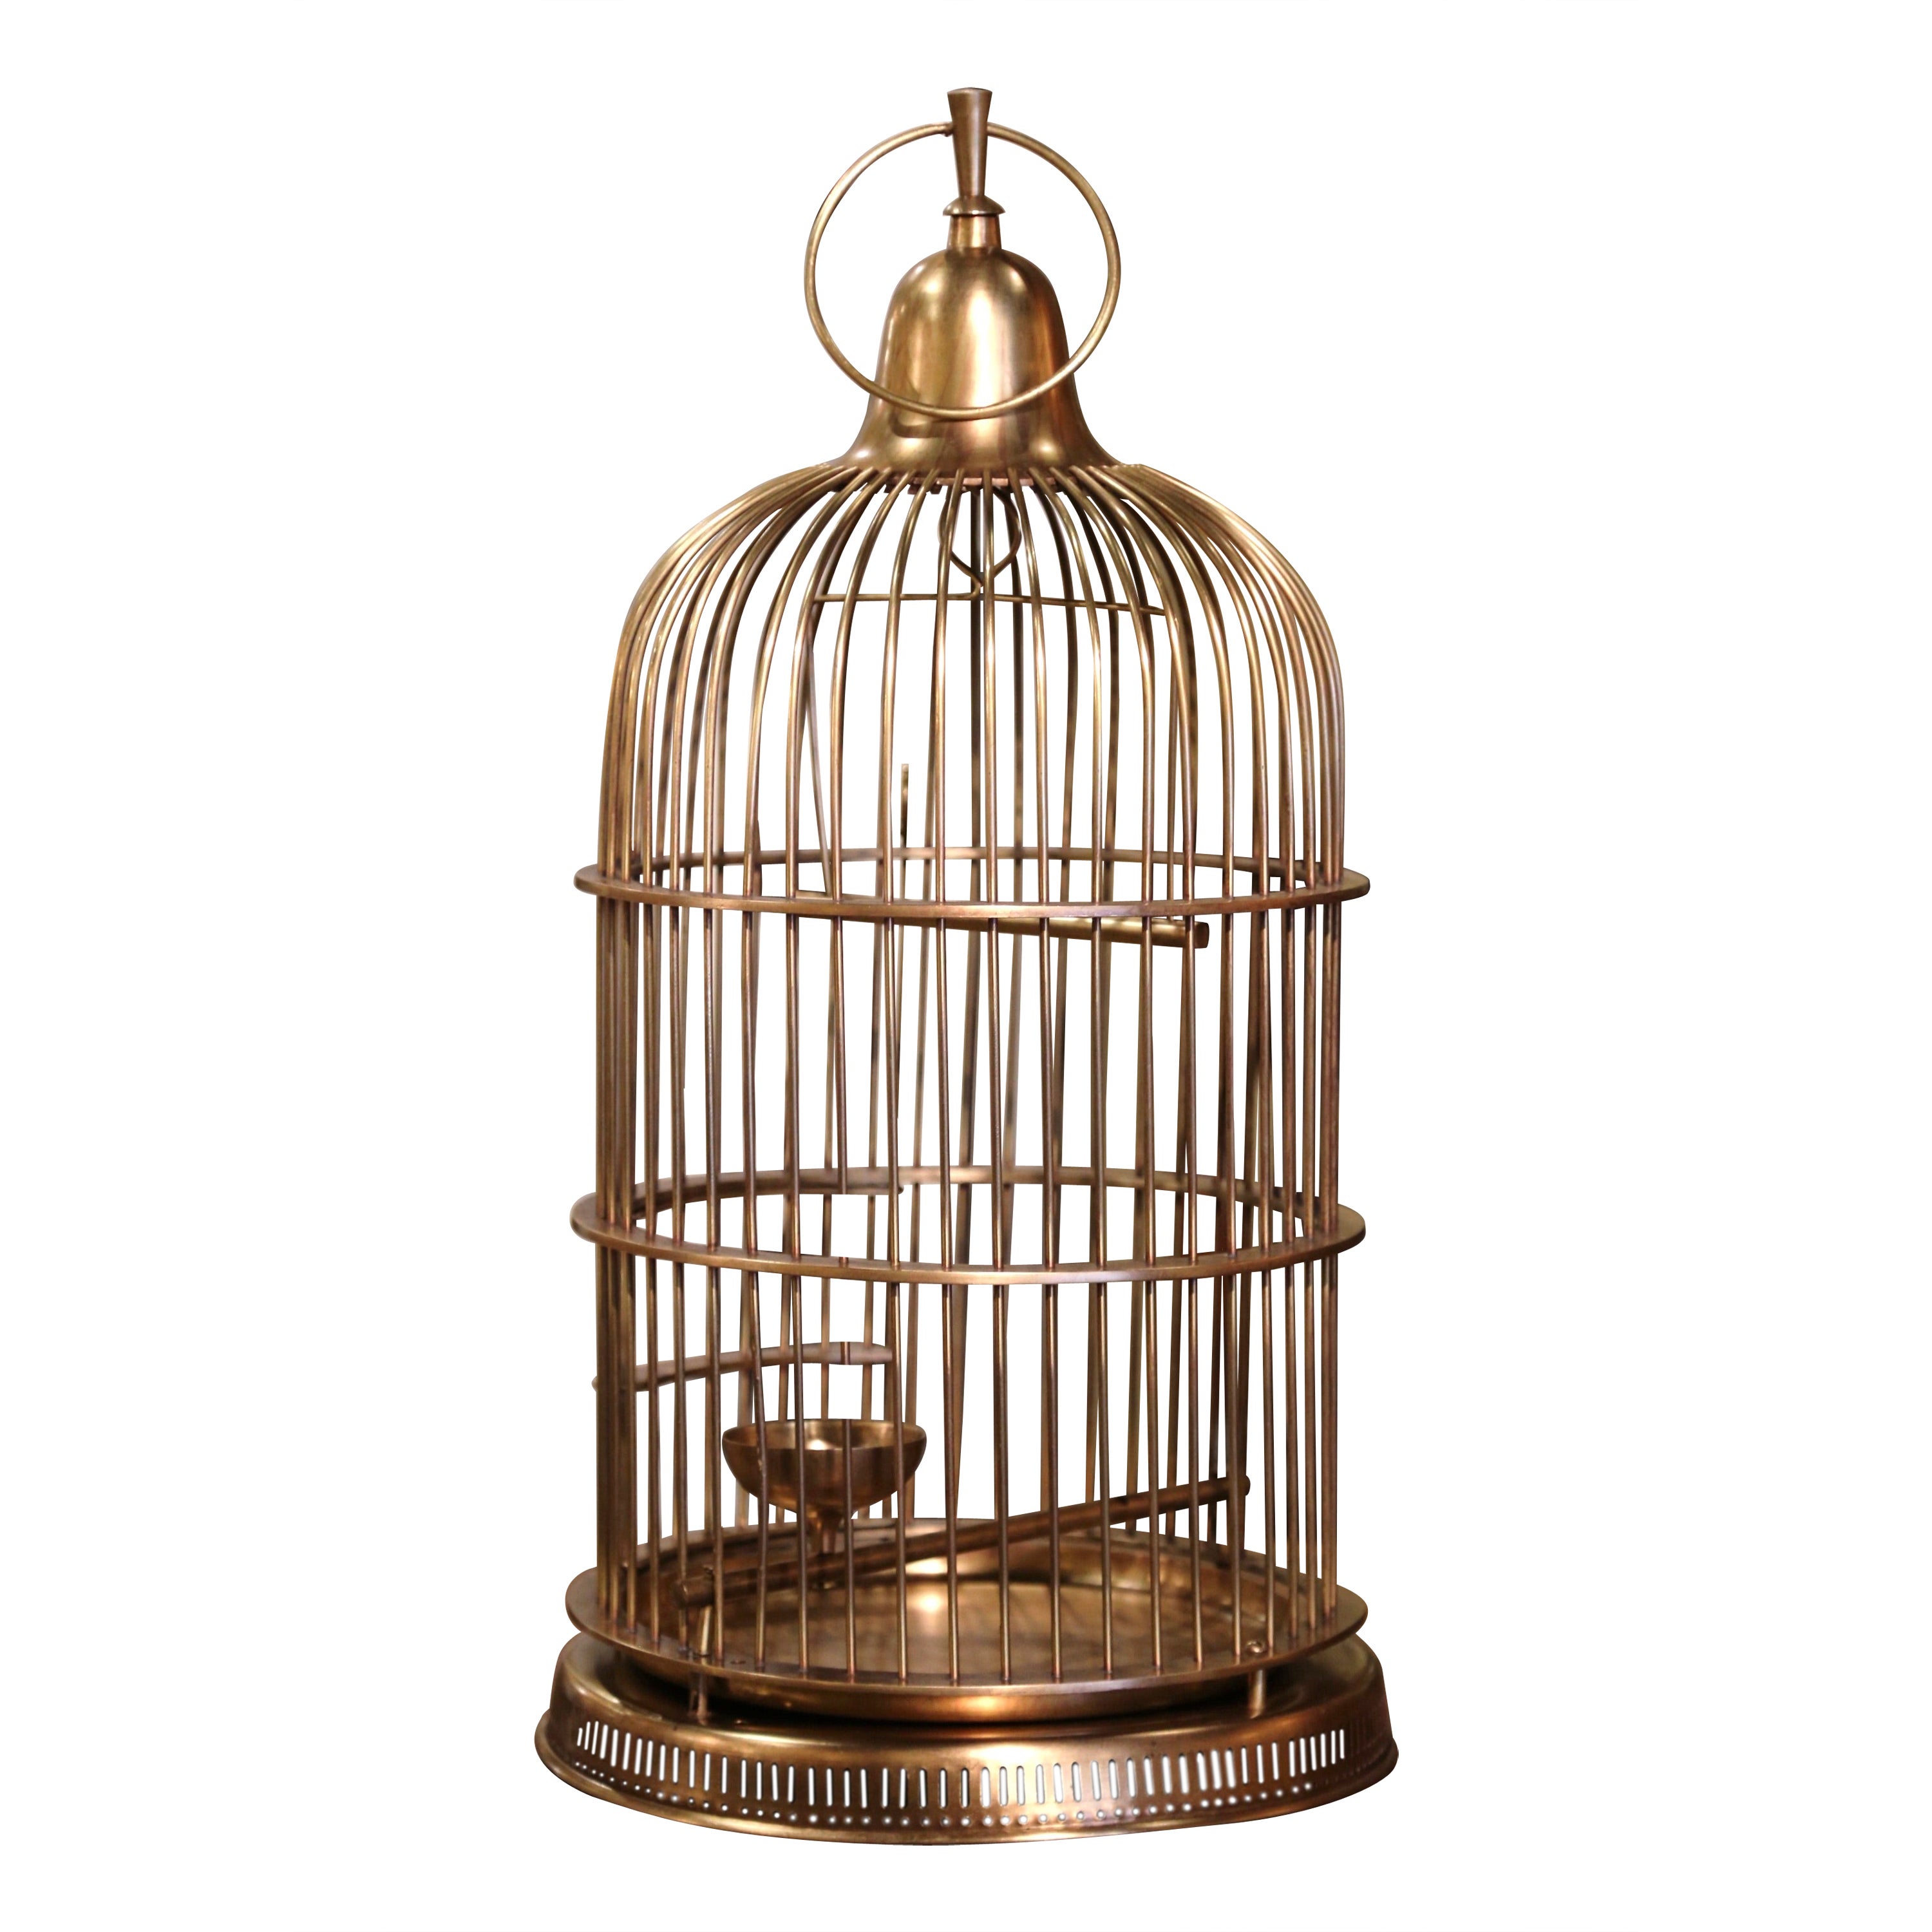 Early 20th Century French Napoleon III Brass Wire Birdcage For Sale